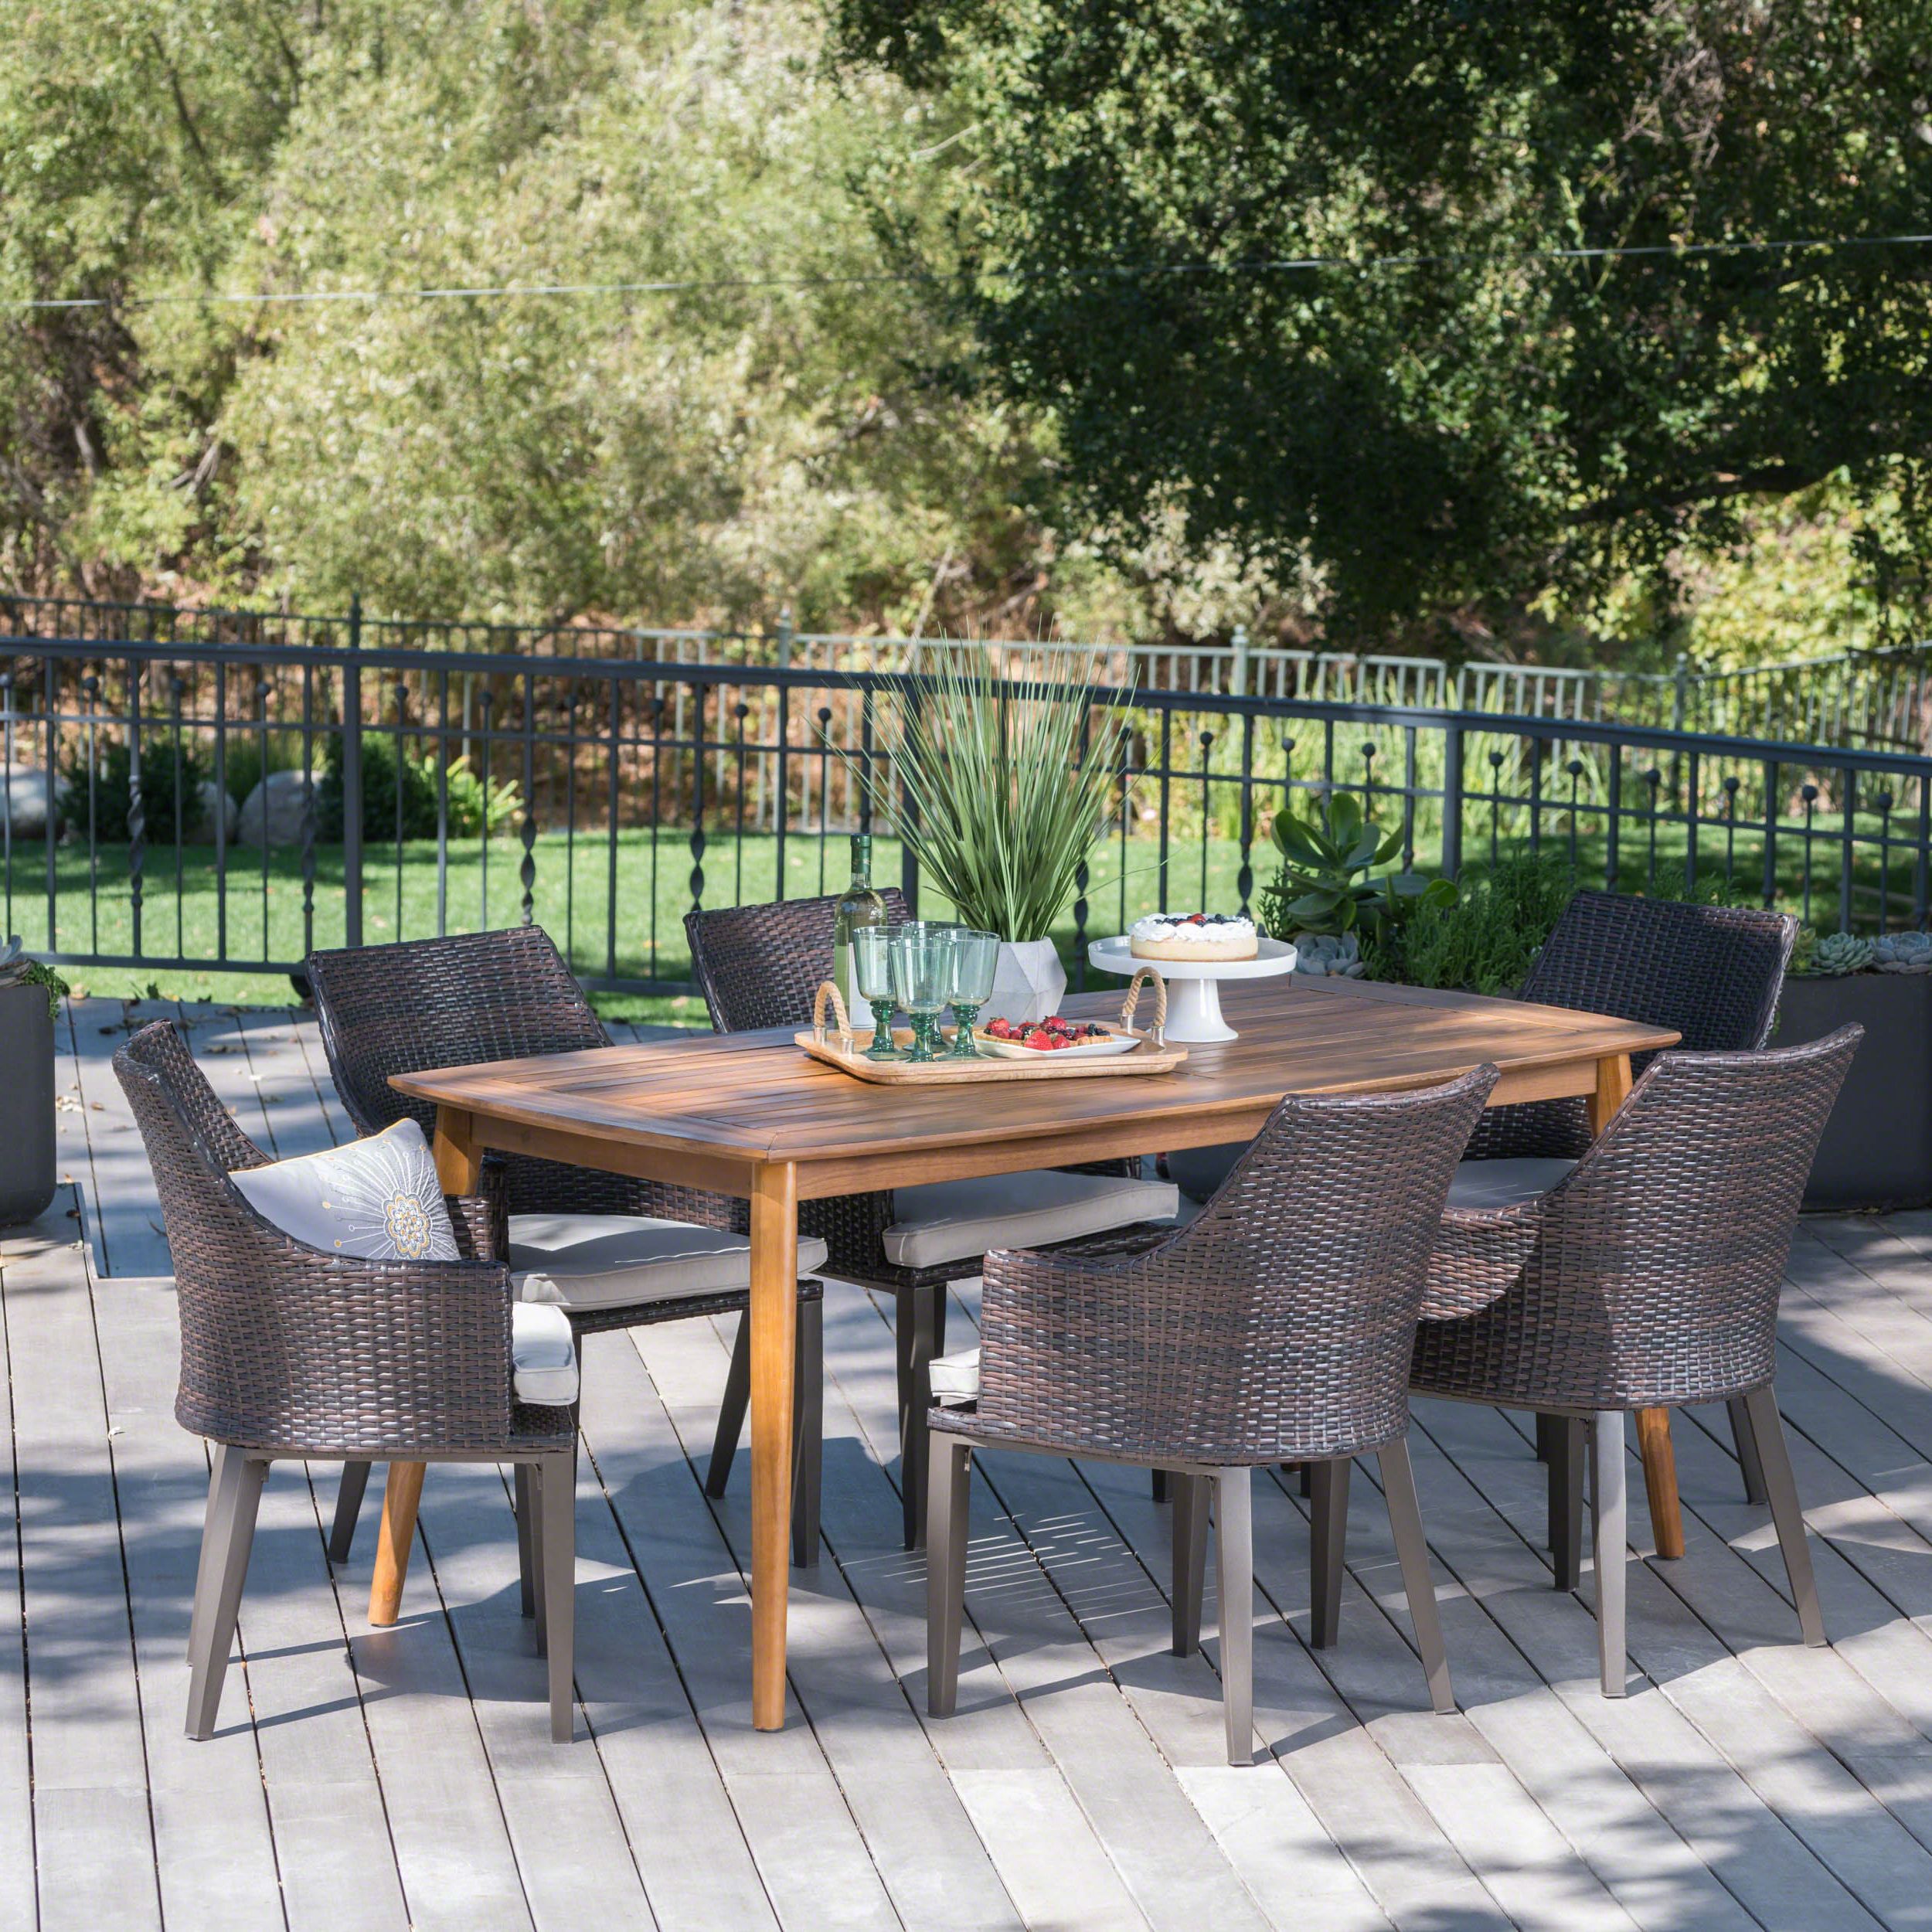 Alexa Outdoor 7 Piece Wicker Rectangular Dining Set With Acacia Wood Throughout Trendy Rectangular Patio Dining Sets (View 4 of 15)